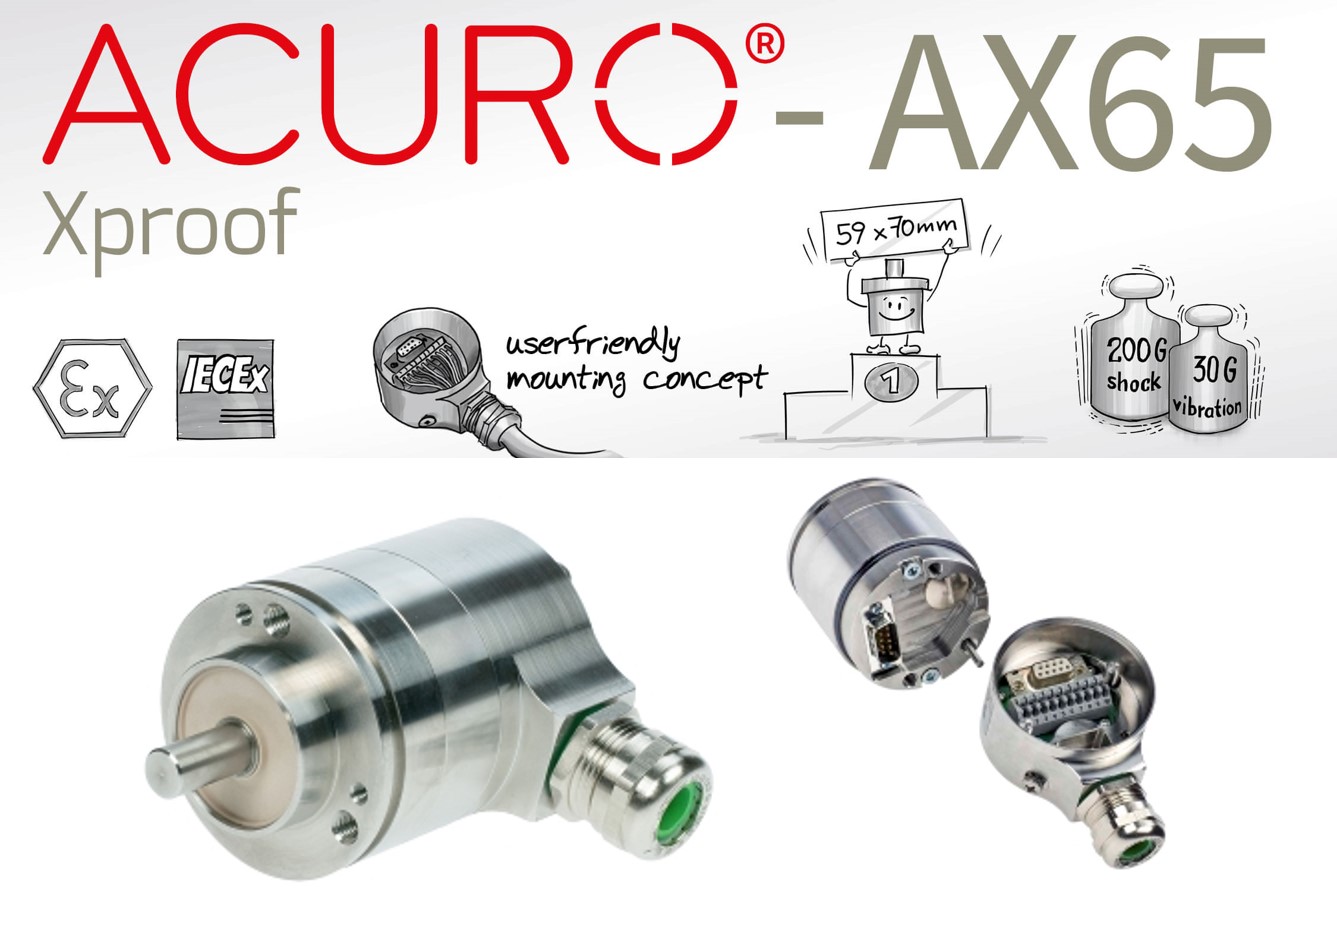 Hengstler ACURO AX65 Explosion-Proof Absolute Encoder